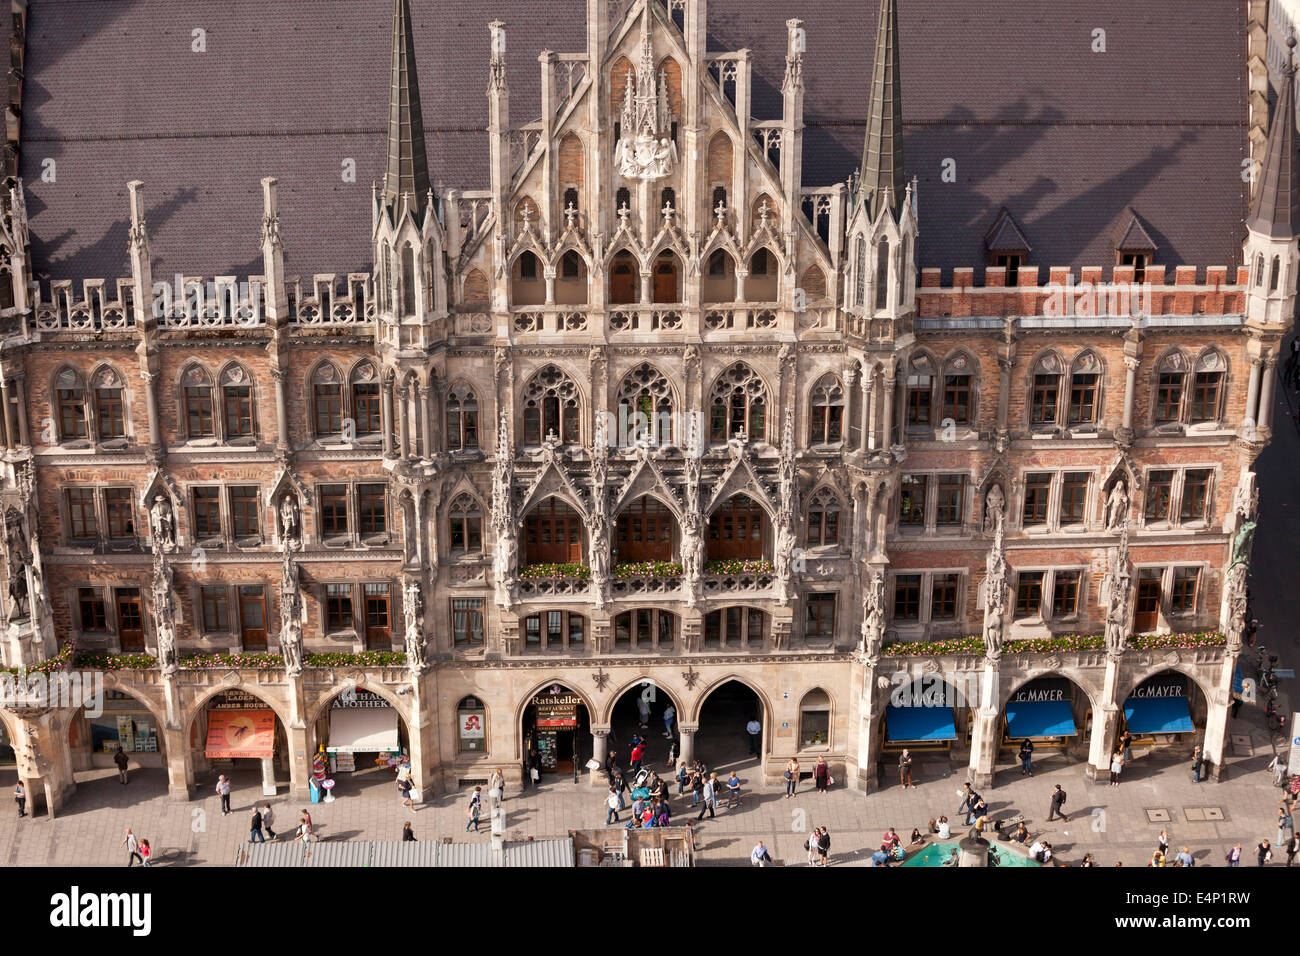 new townhall  on the central square Marienplatz in Munich, Bavaria, Germany Stock Photo